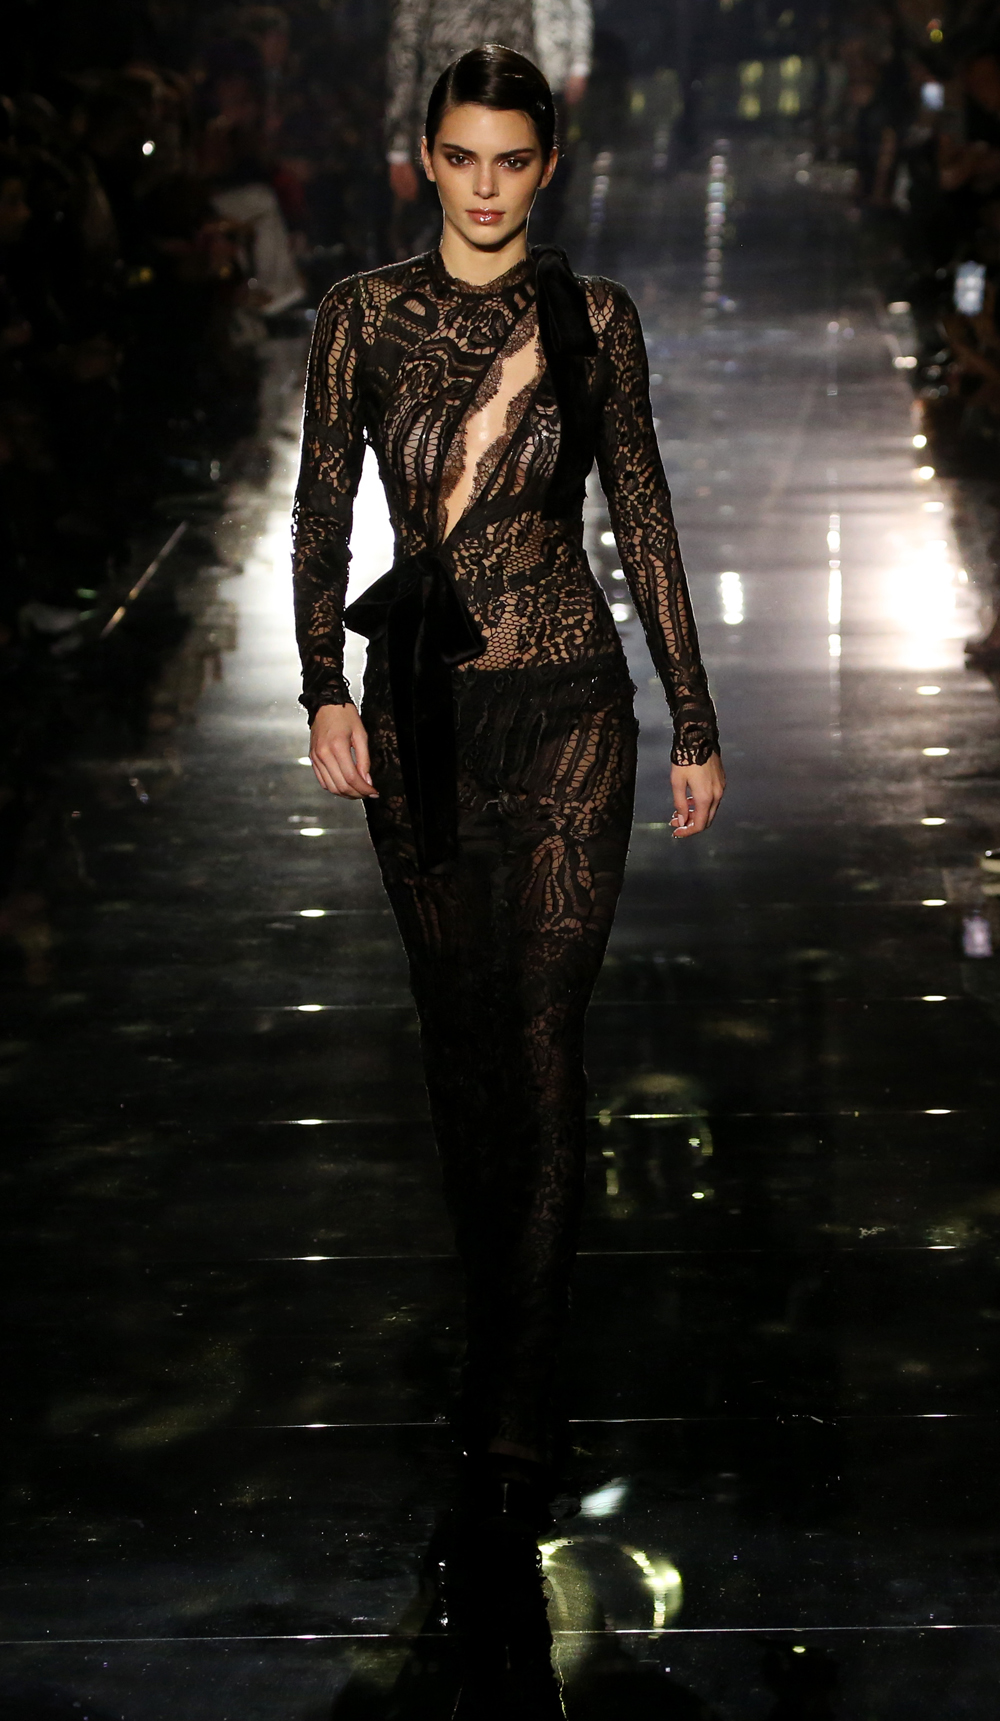 Kendall Jenner on the catwalk at the Tom Ford show for Fall Winter 2020 at Milk Studios in Los Angeles